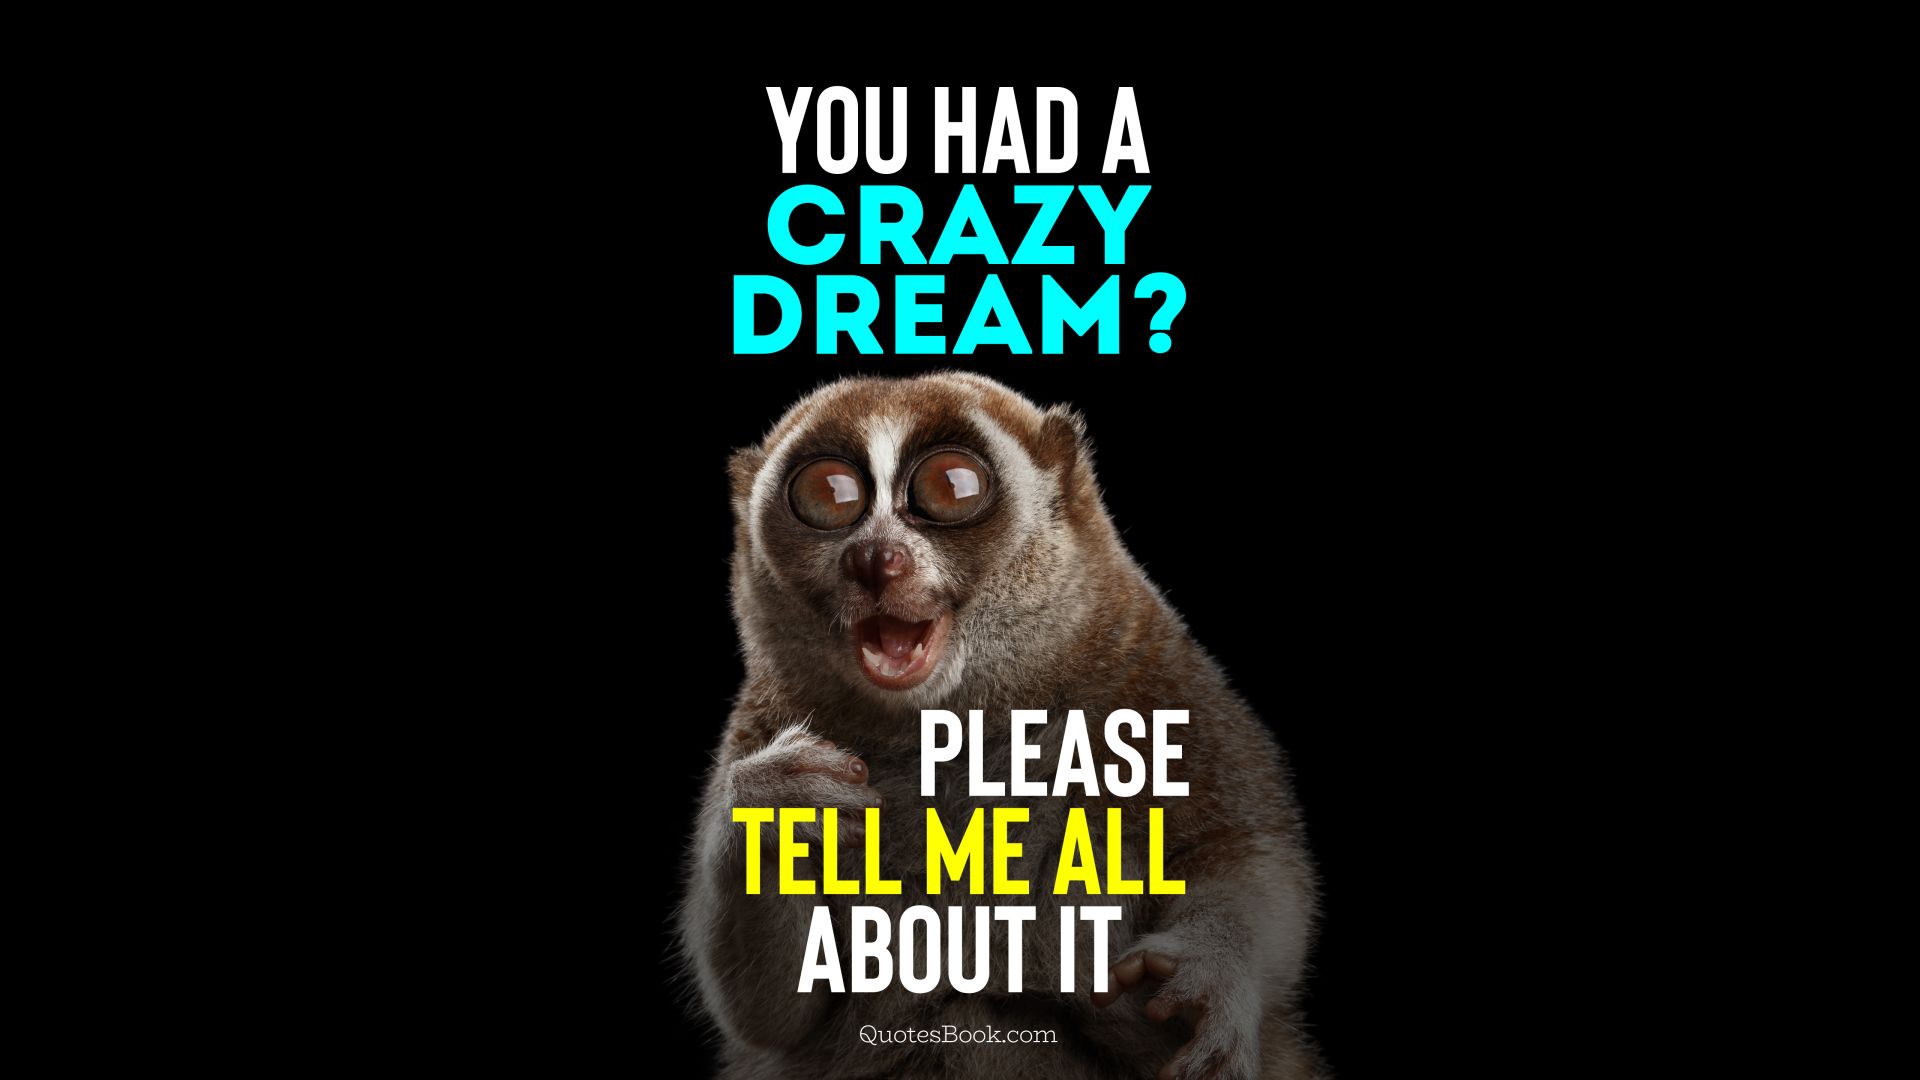 You had a crazy dream? Please tell me all about it